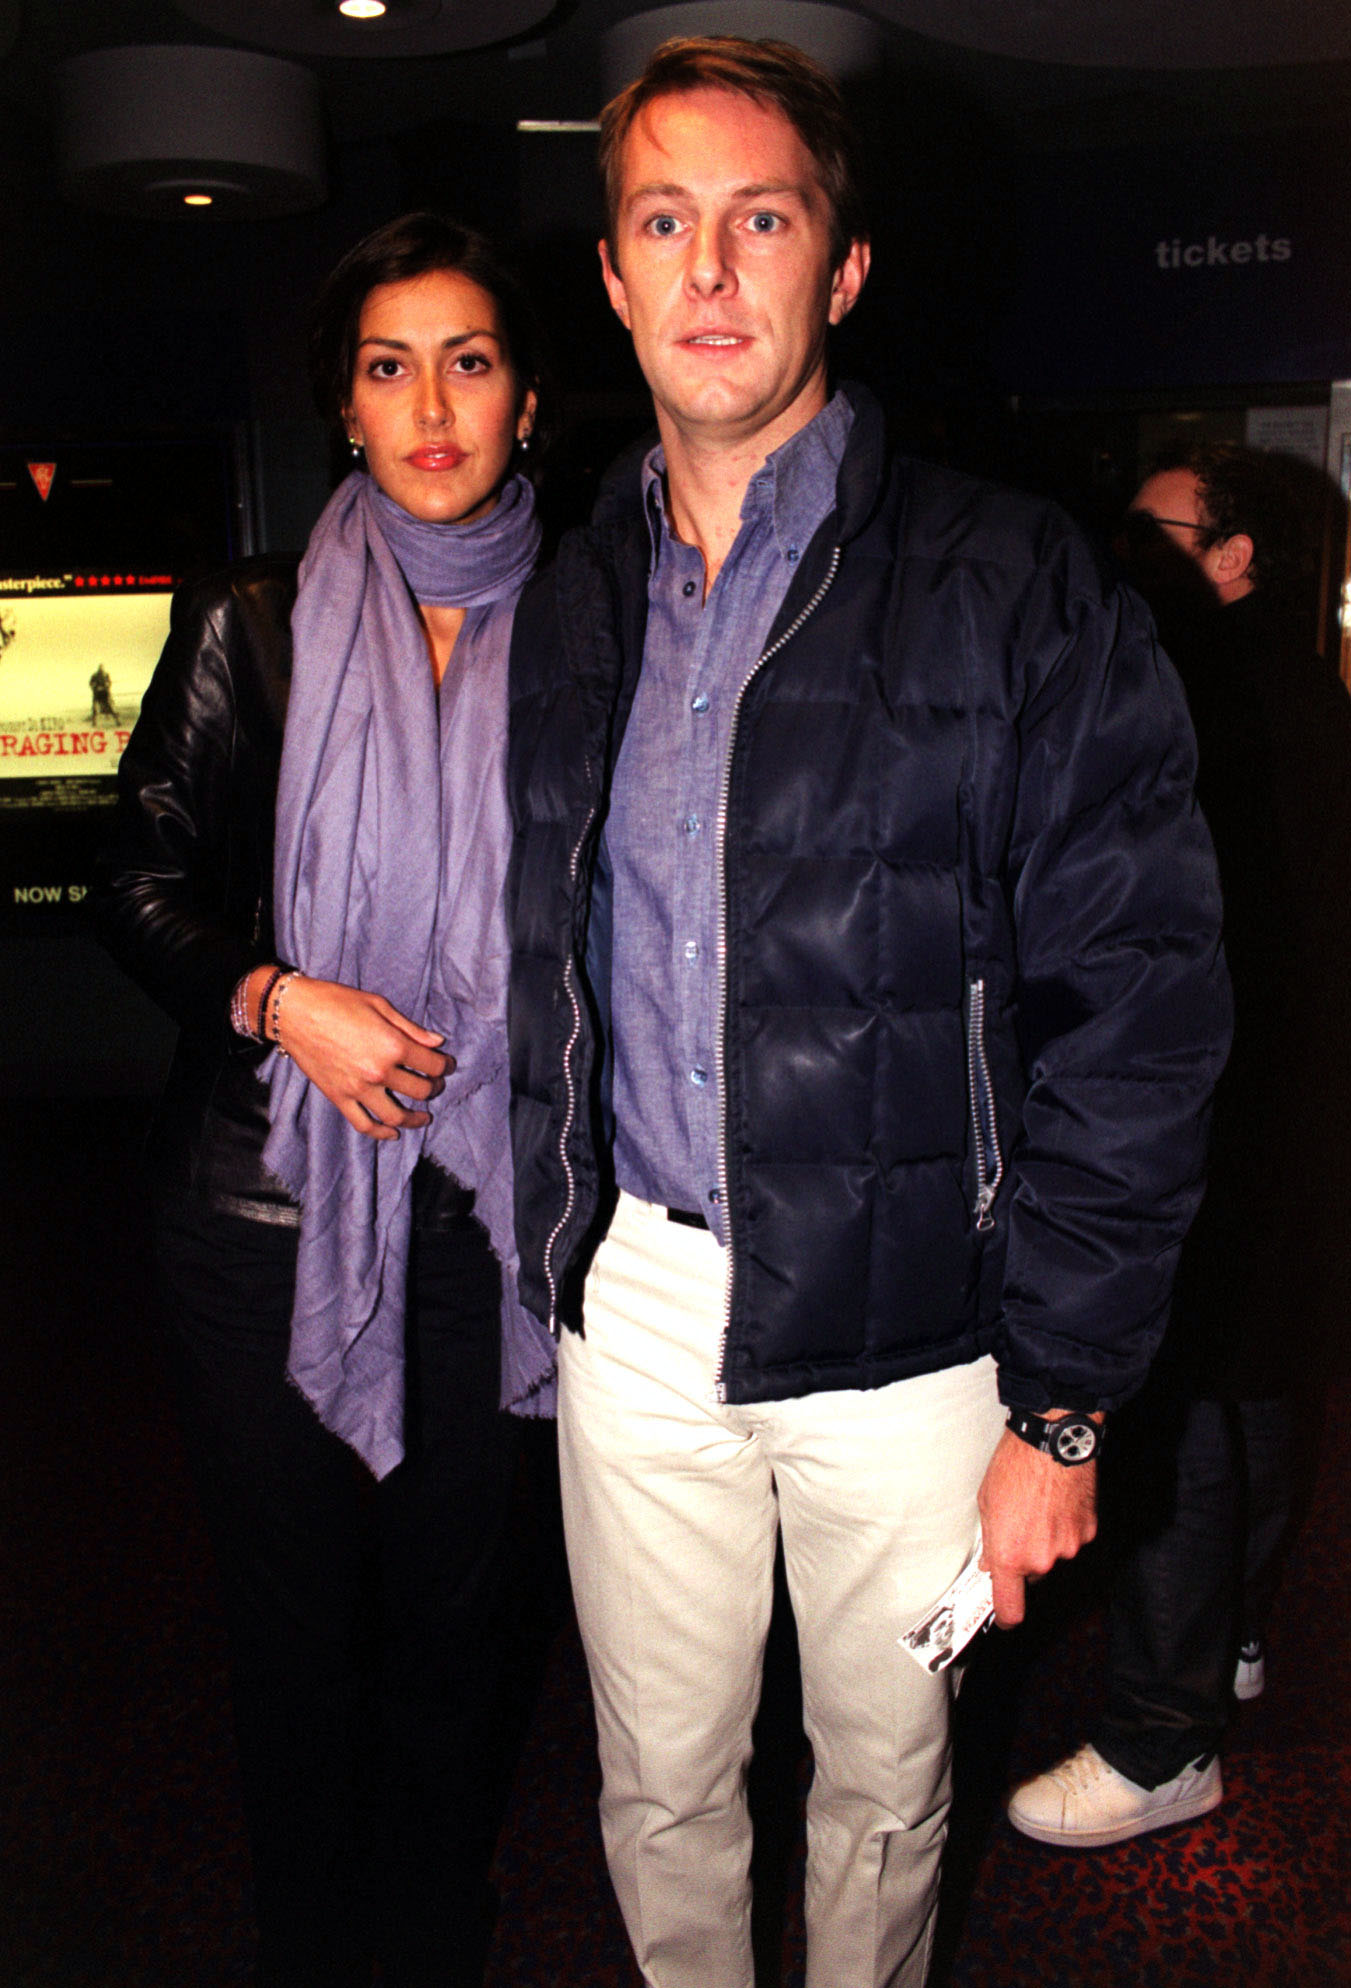 Natasha Caine and Tim Scott at a special gala screening of Martin Scorsese's "Raging Bull" at the ABC Cinema on Shaftesbury Avenue on October 26, 2000. | Source: Getty Images